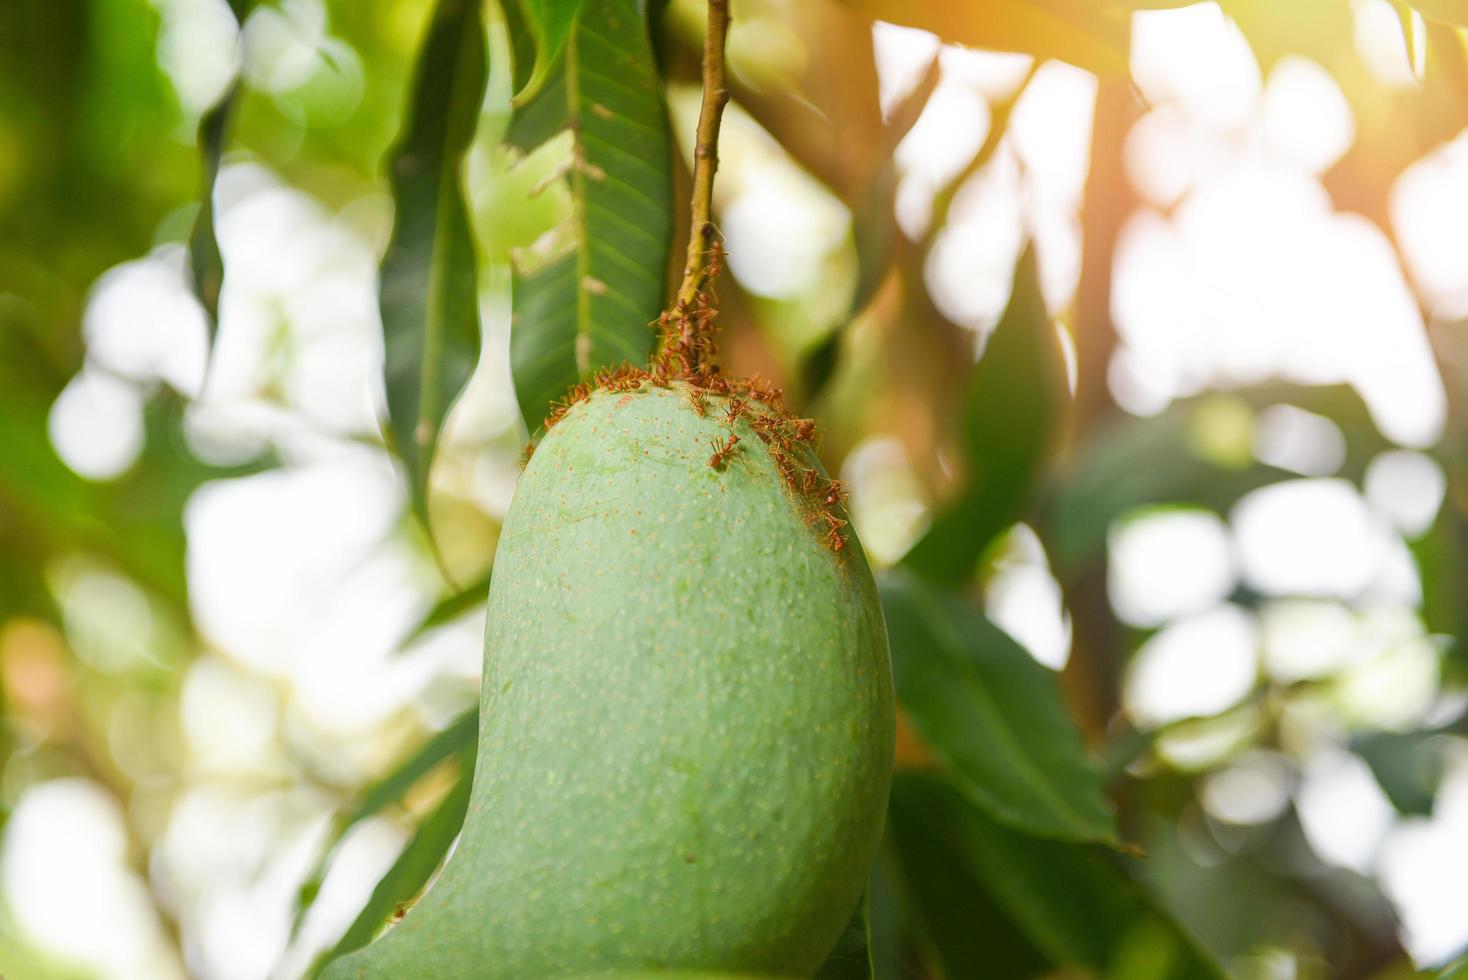 raw mango hanging on tree with leaf background in summer fruit garden orchard - red ant on mango tree photo